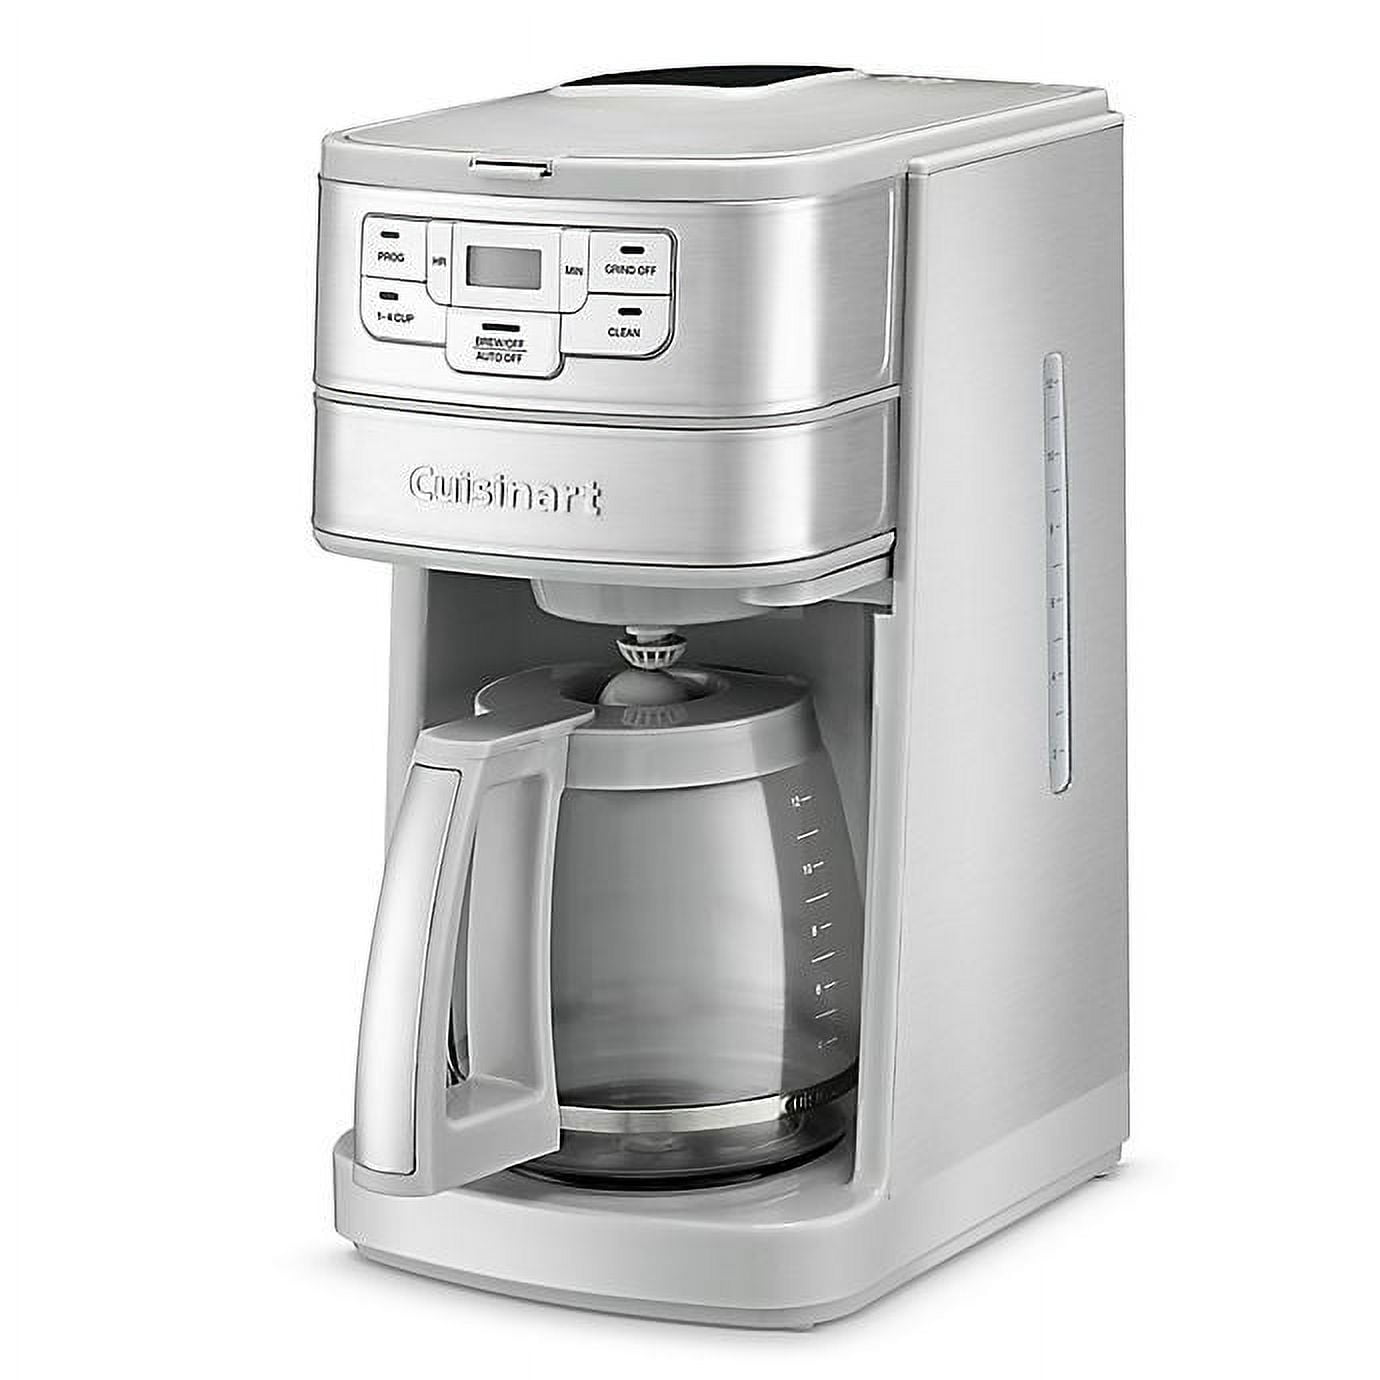 Put a Cuisinart Auto Cold Brew Coffeemaker in your arsenal for $40 (Reg.  $70)